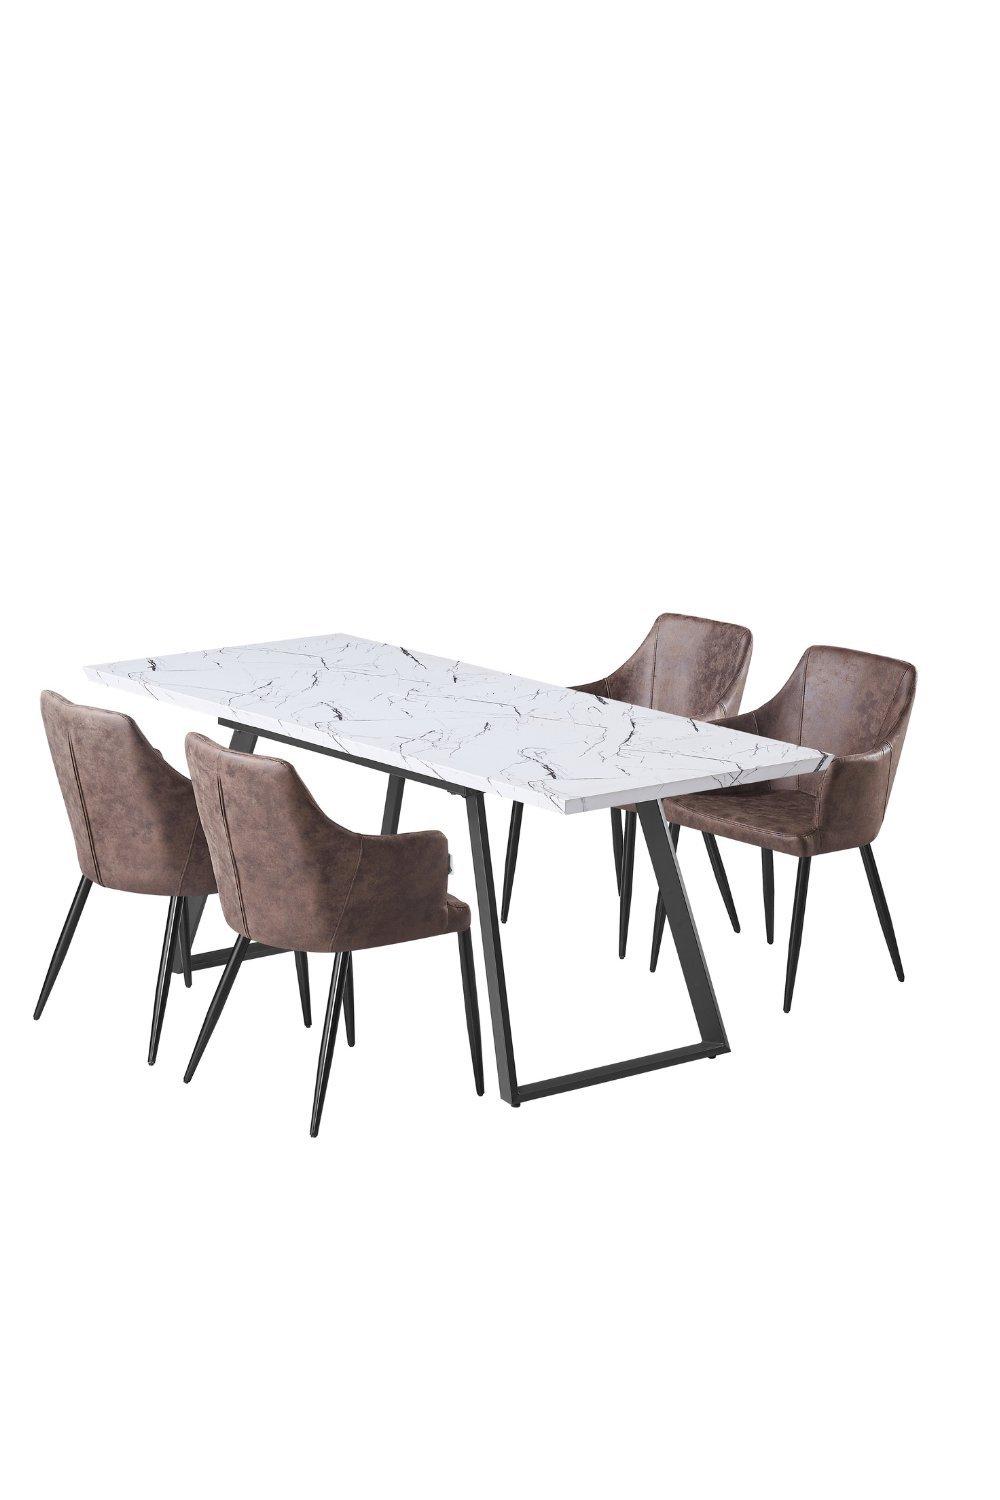 'Zarah Toga' LUX Dining Set with a Table & 4 Chairs